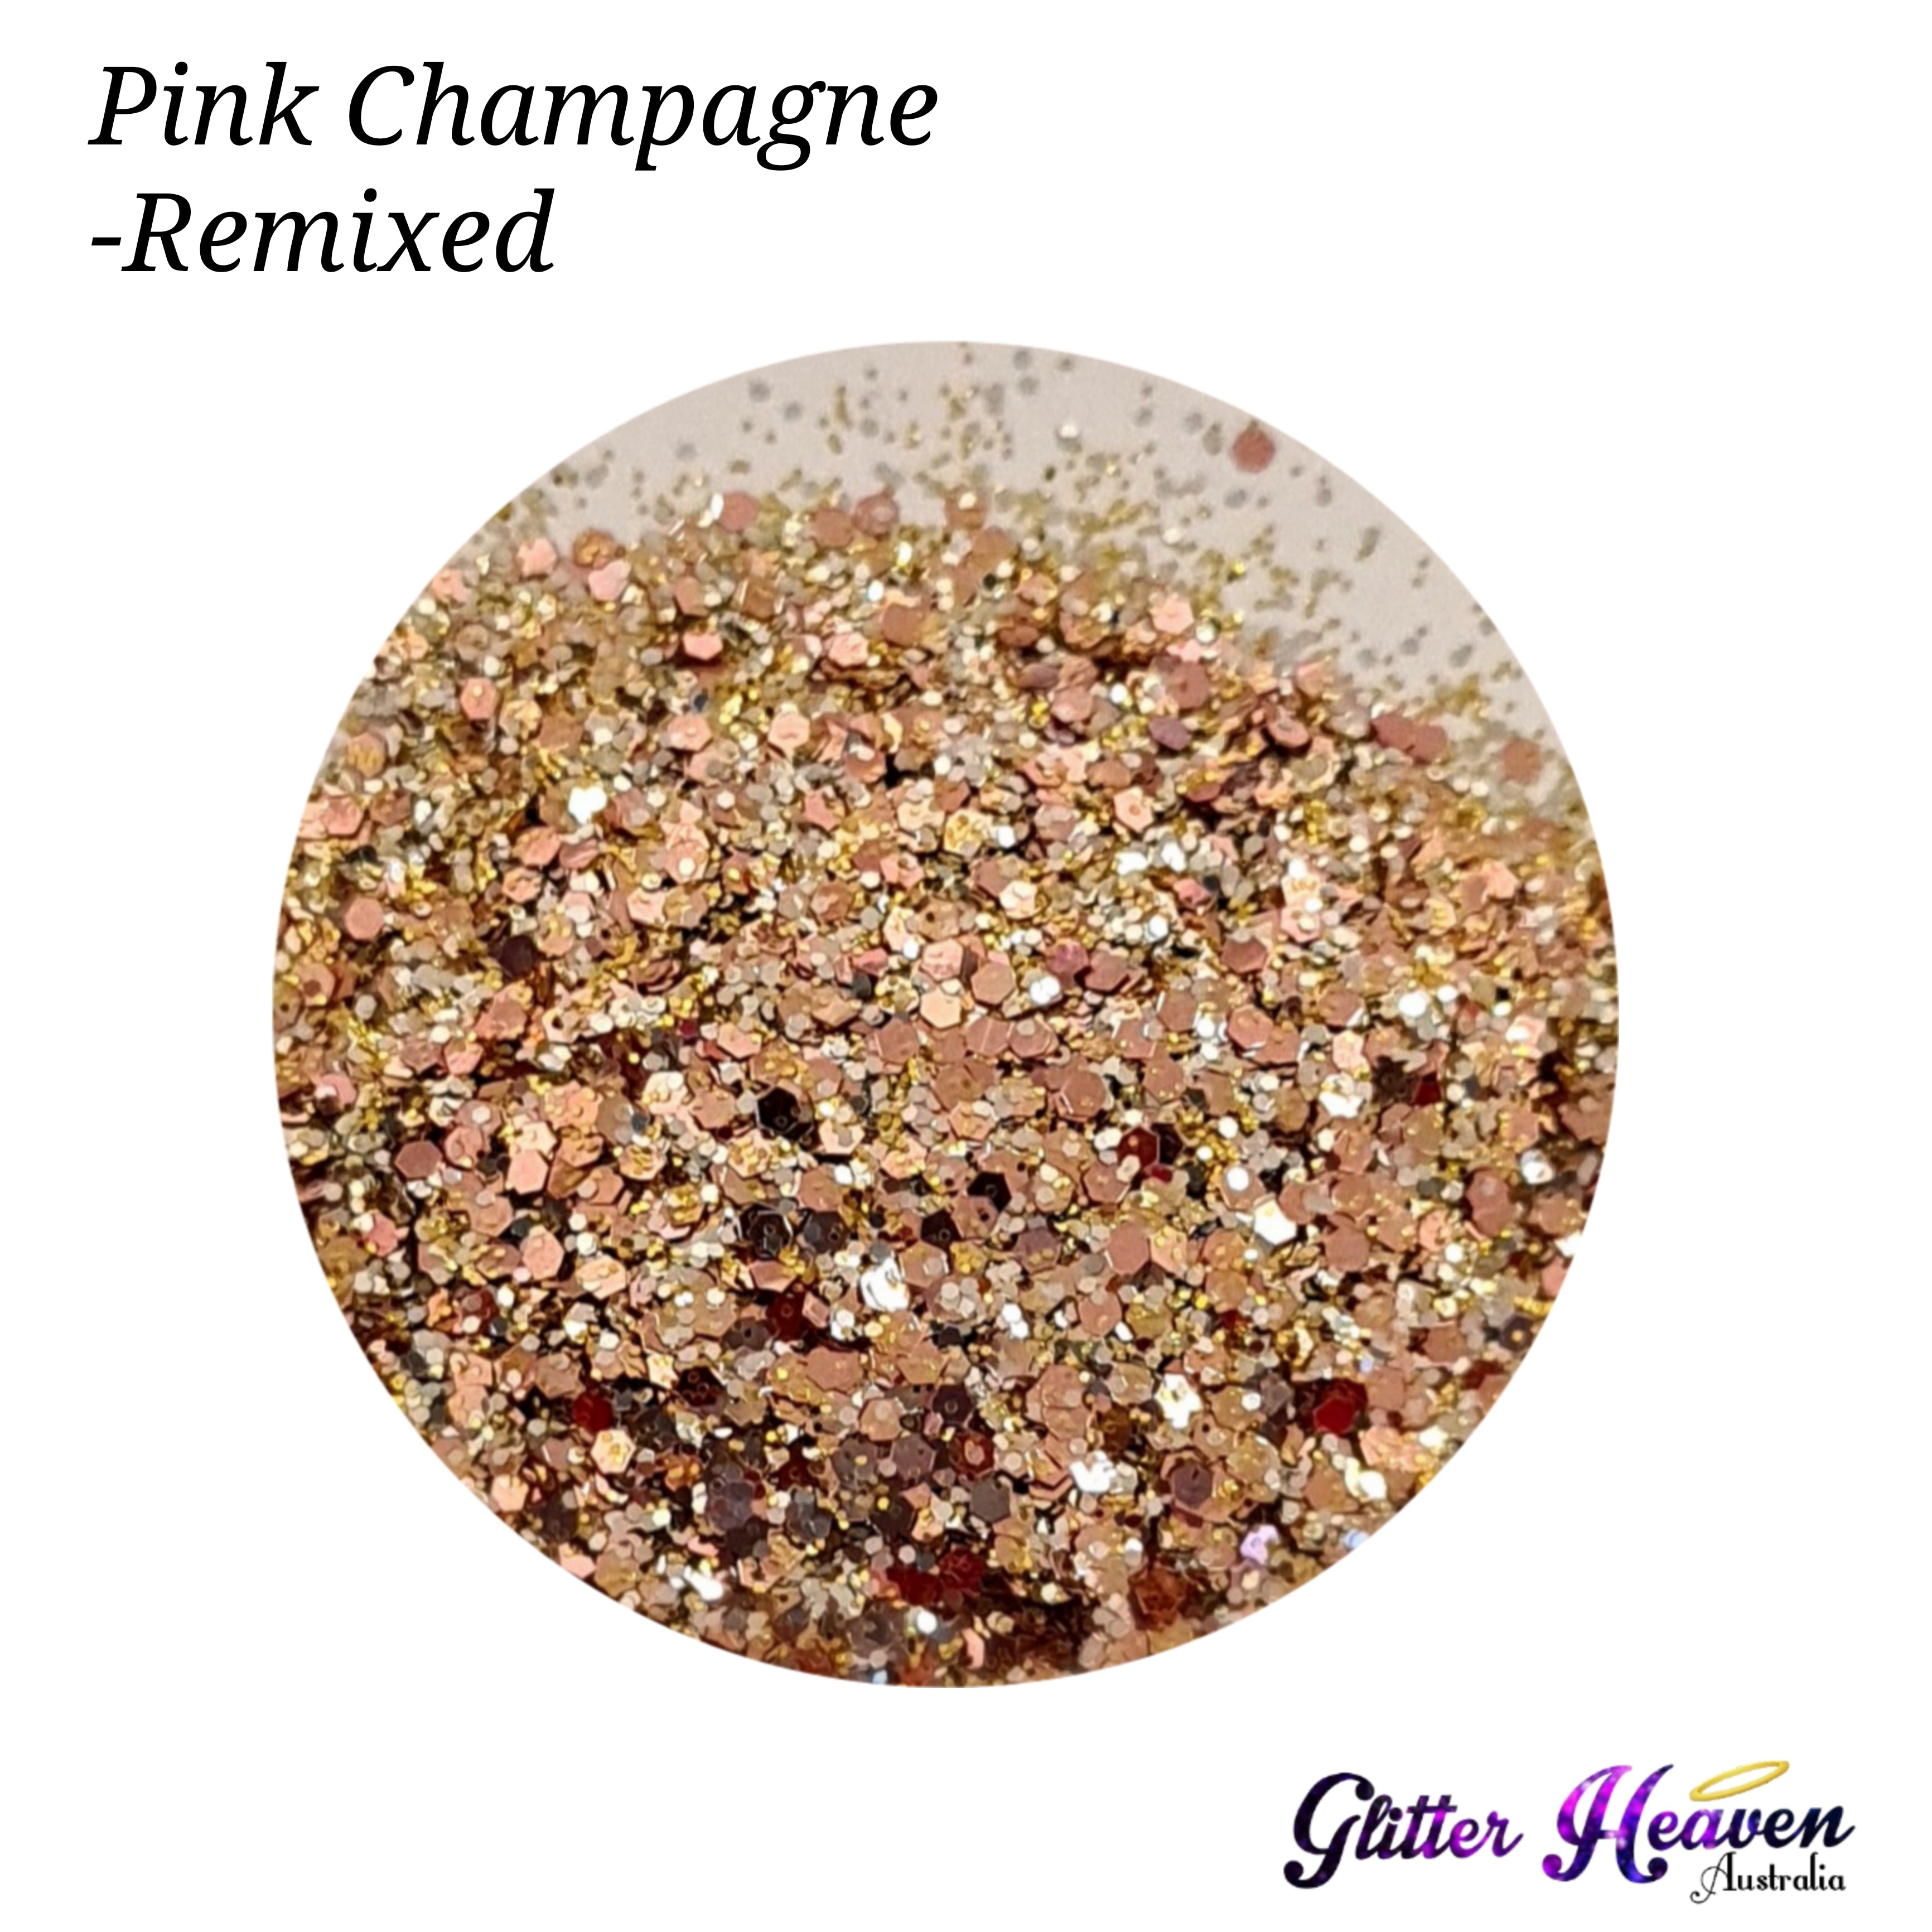 Pink Champagne - Remixed